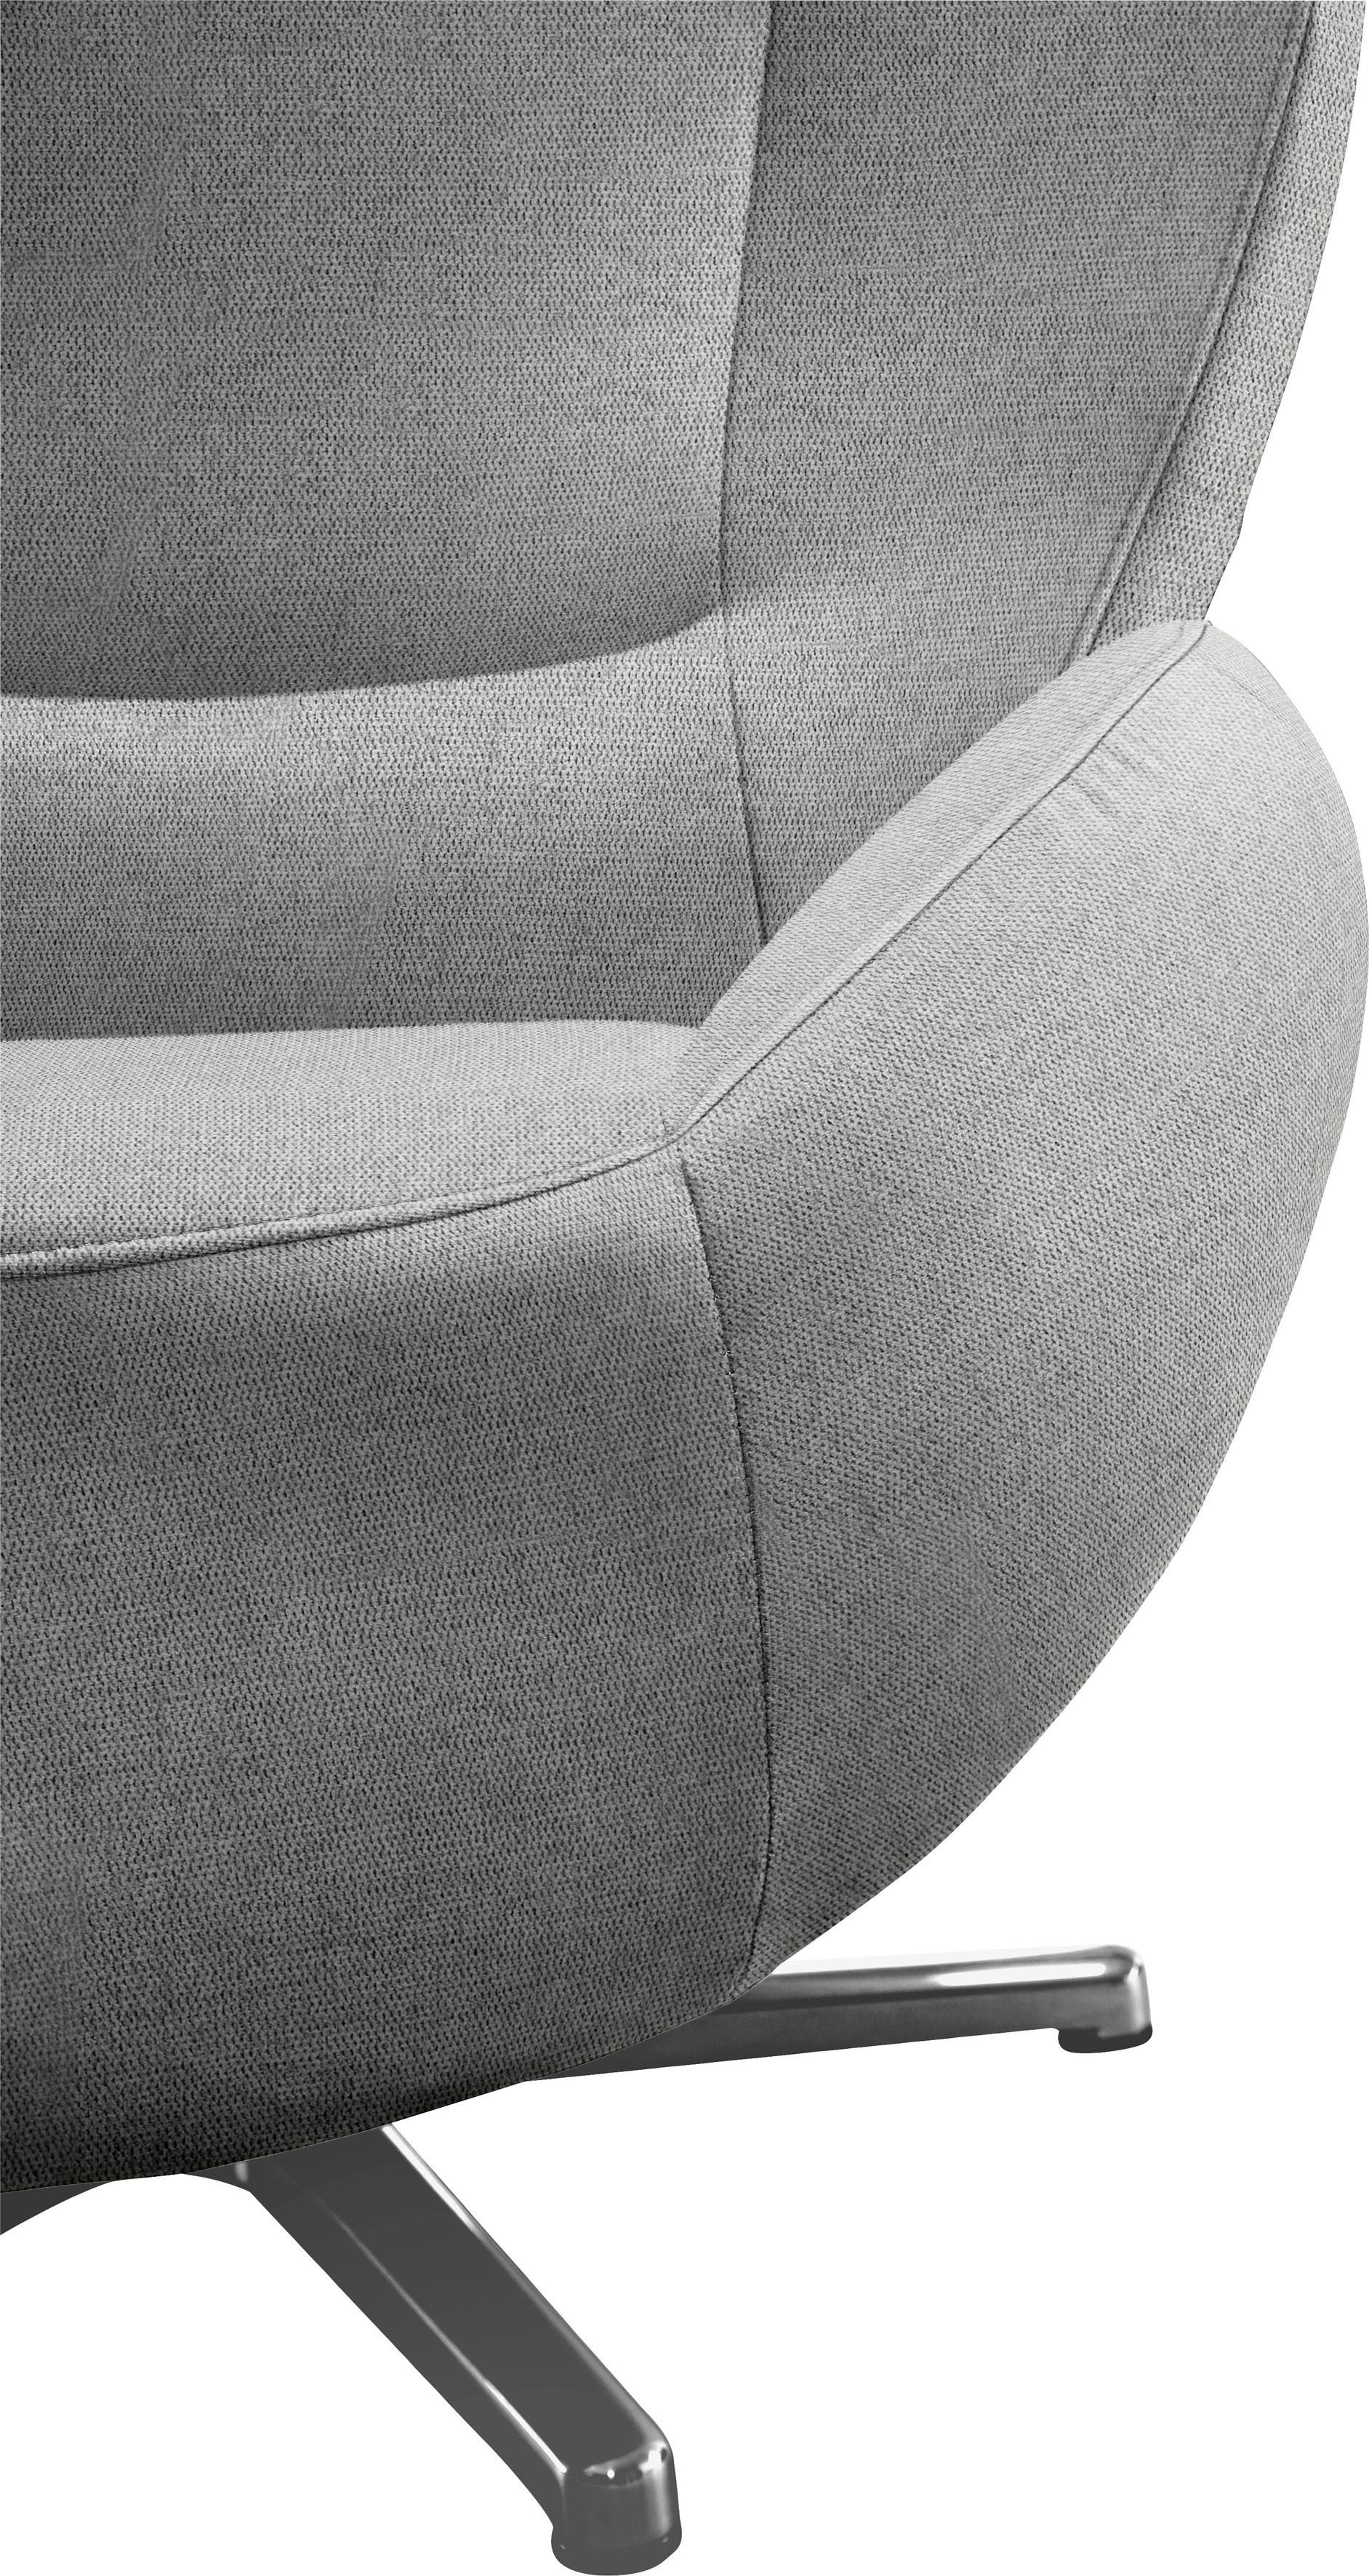 TOM TOM in Loungesessel Metall-Drehfuß PURE, HOME Chrom TAILOR mit